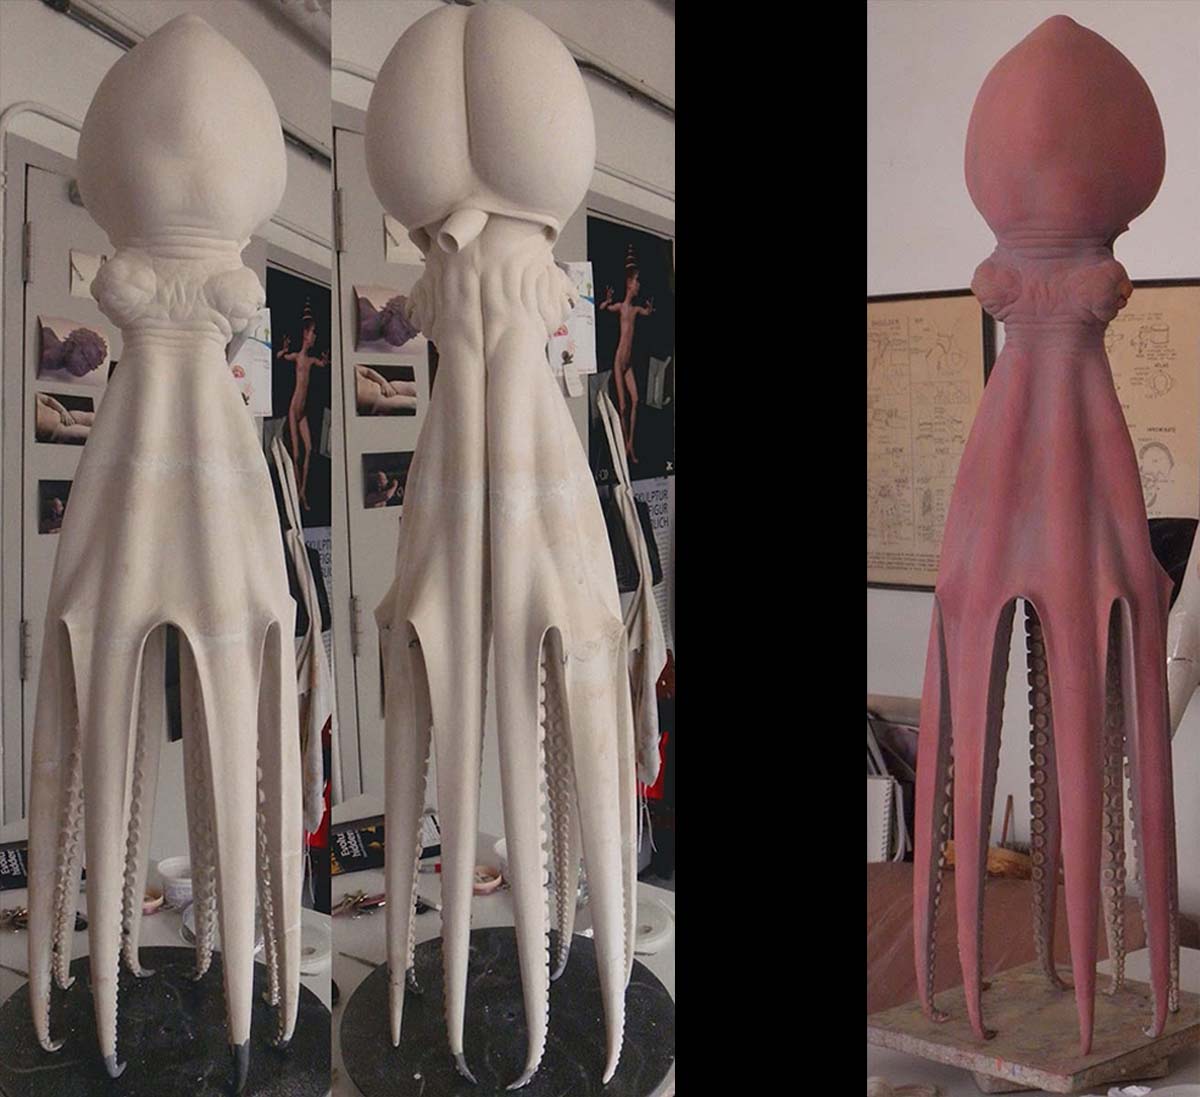 octopus sculptures being painted